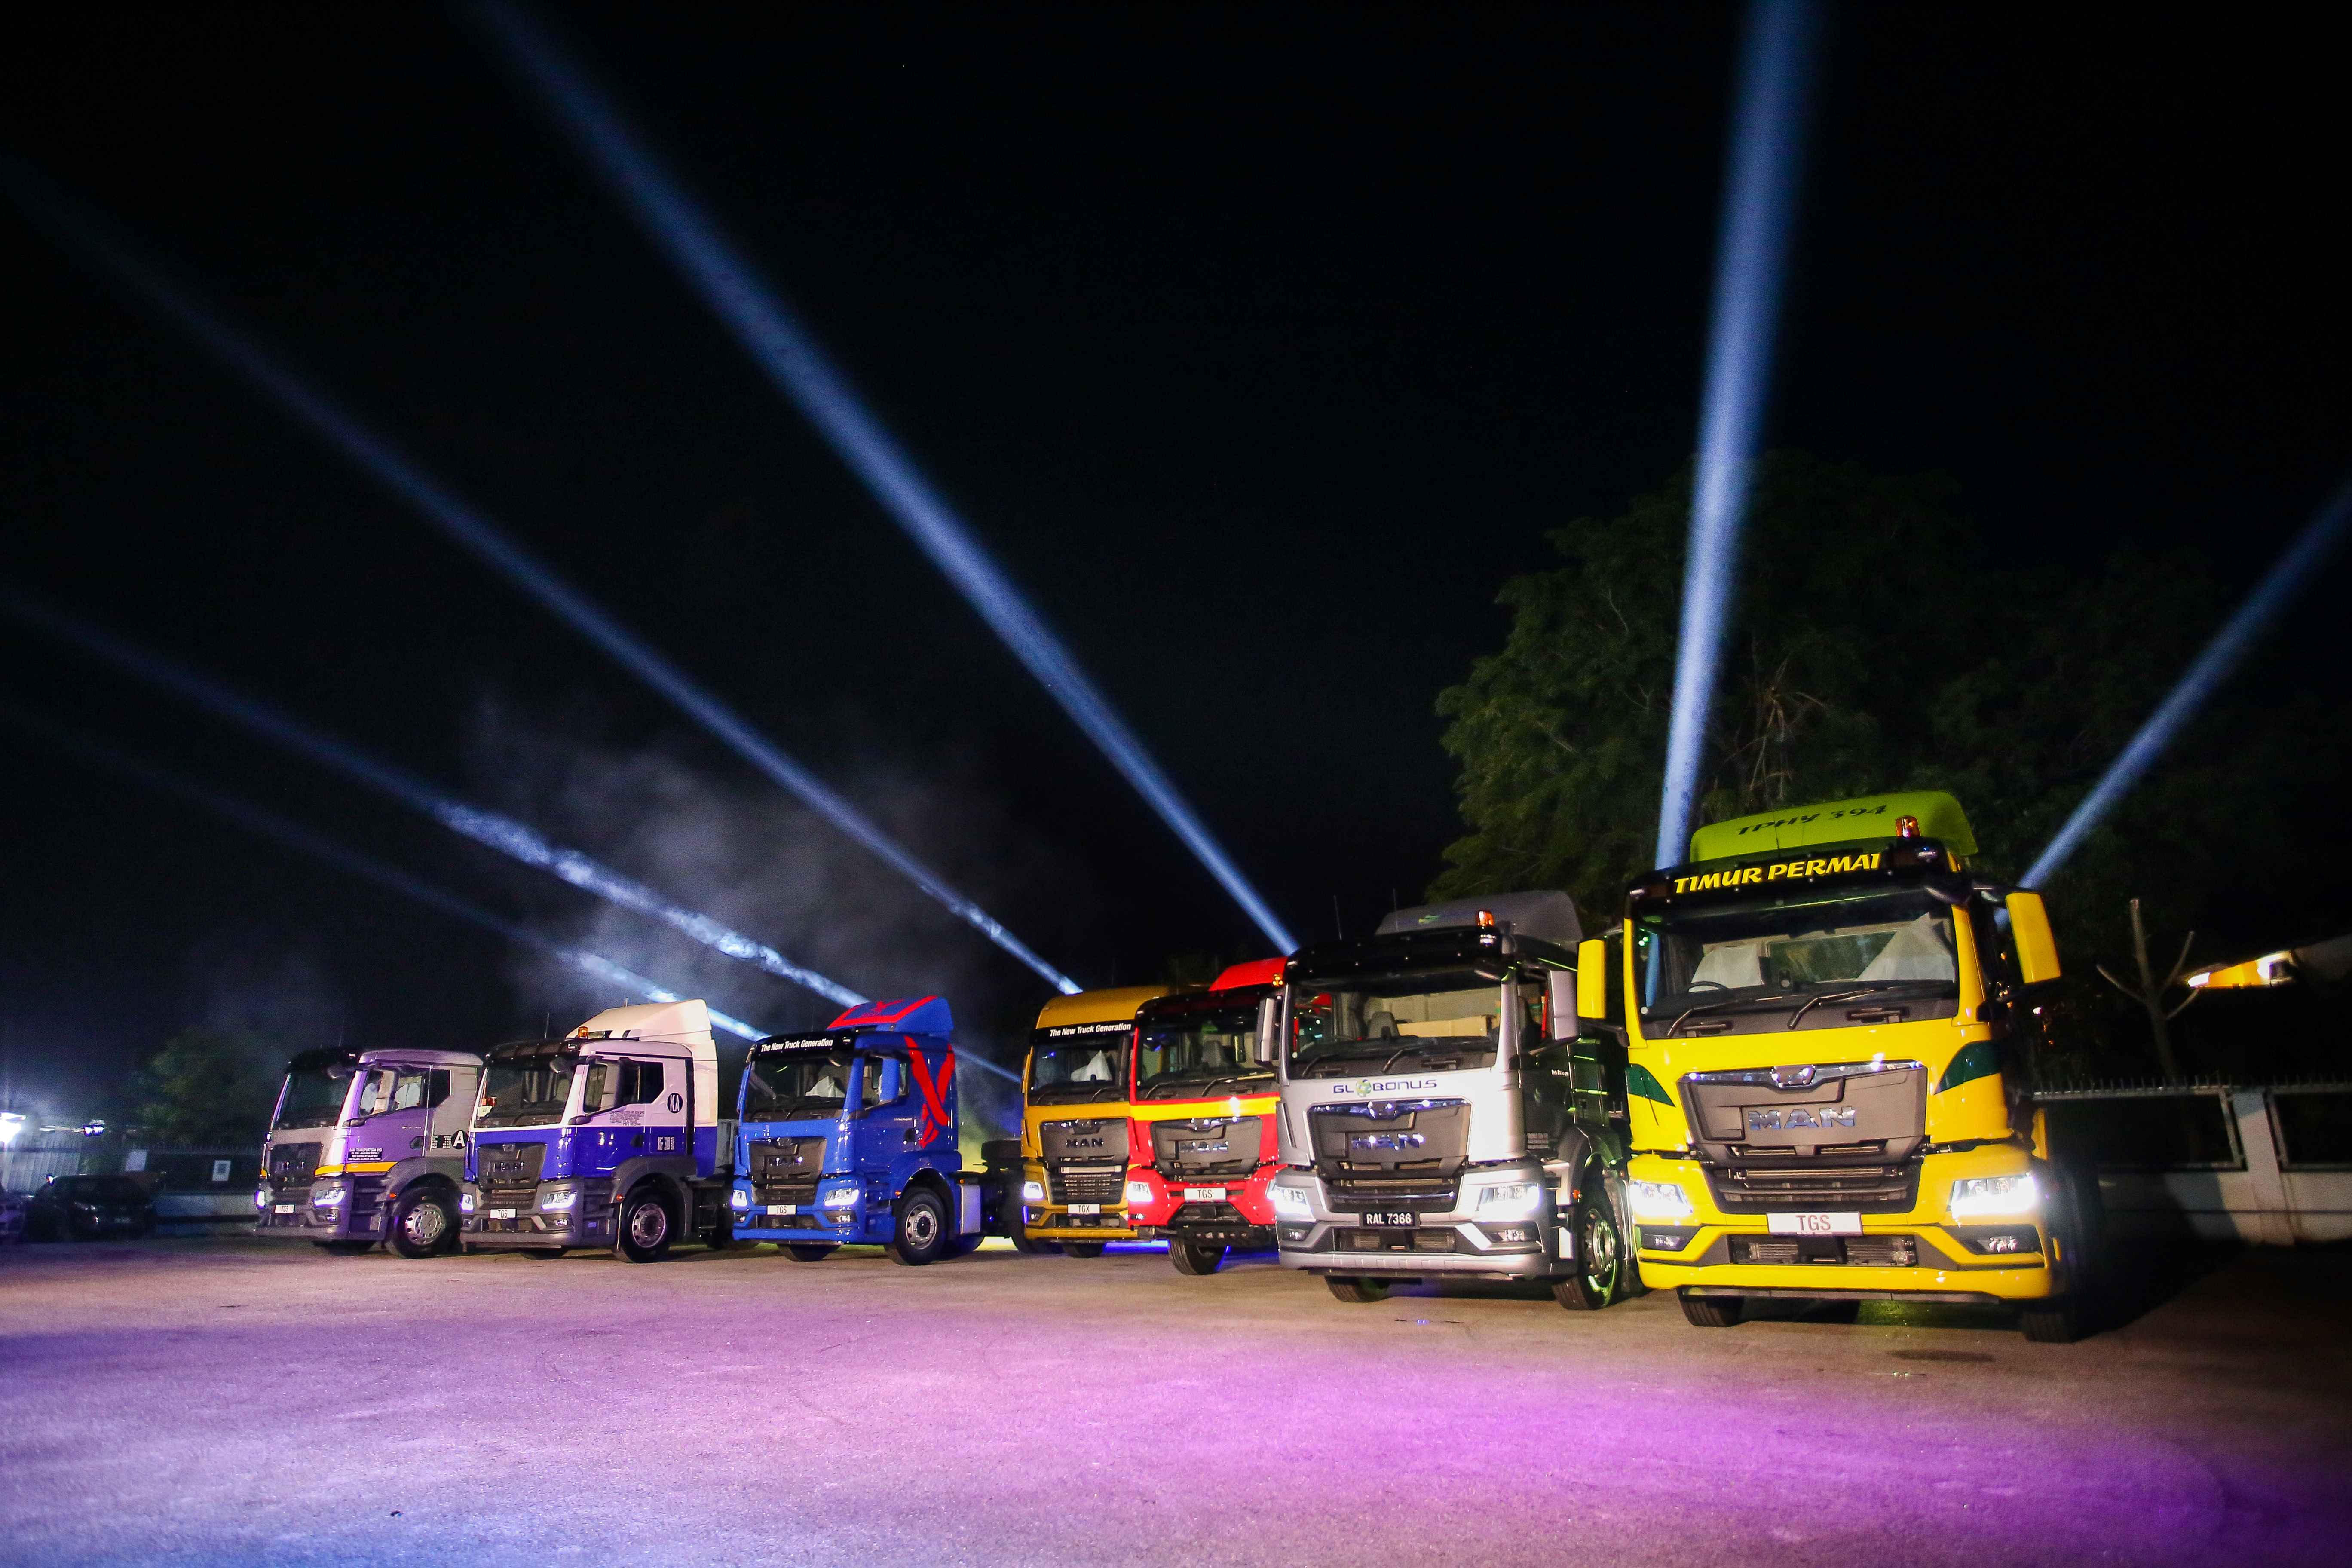 First batch of New MAN Truck Generation with Euro V Engines Now on Malaysian Roads